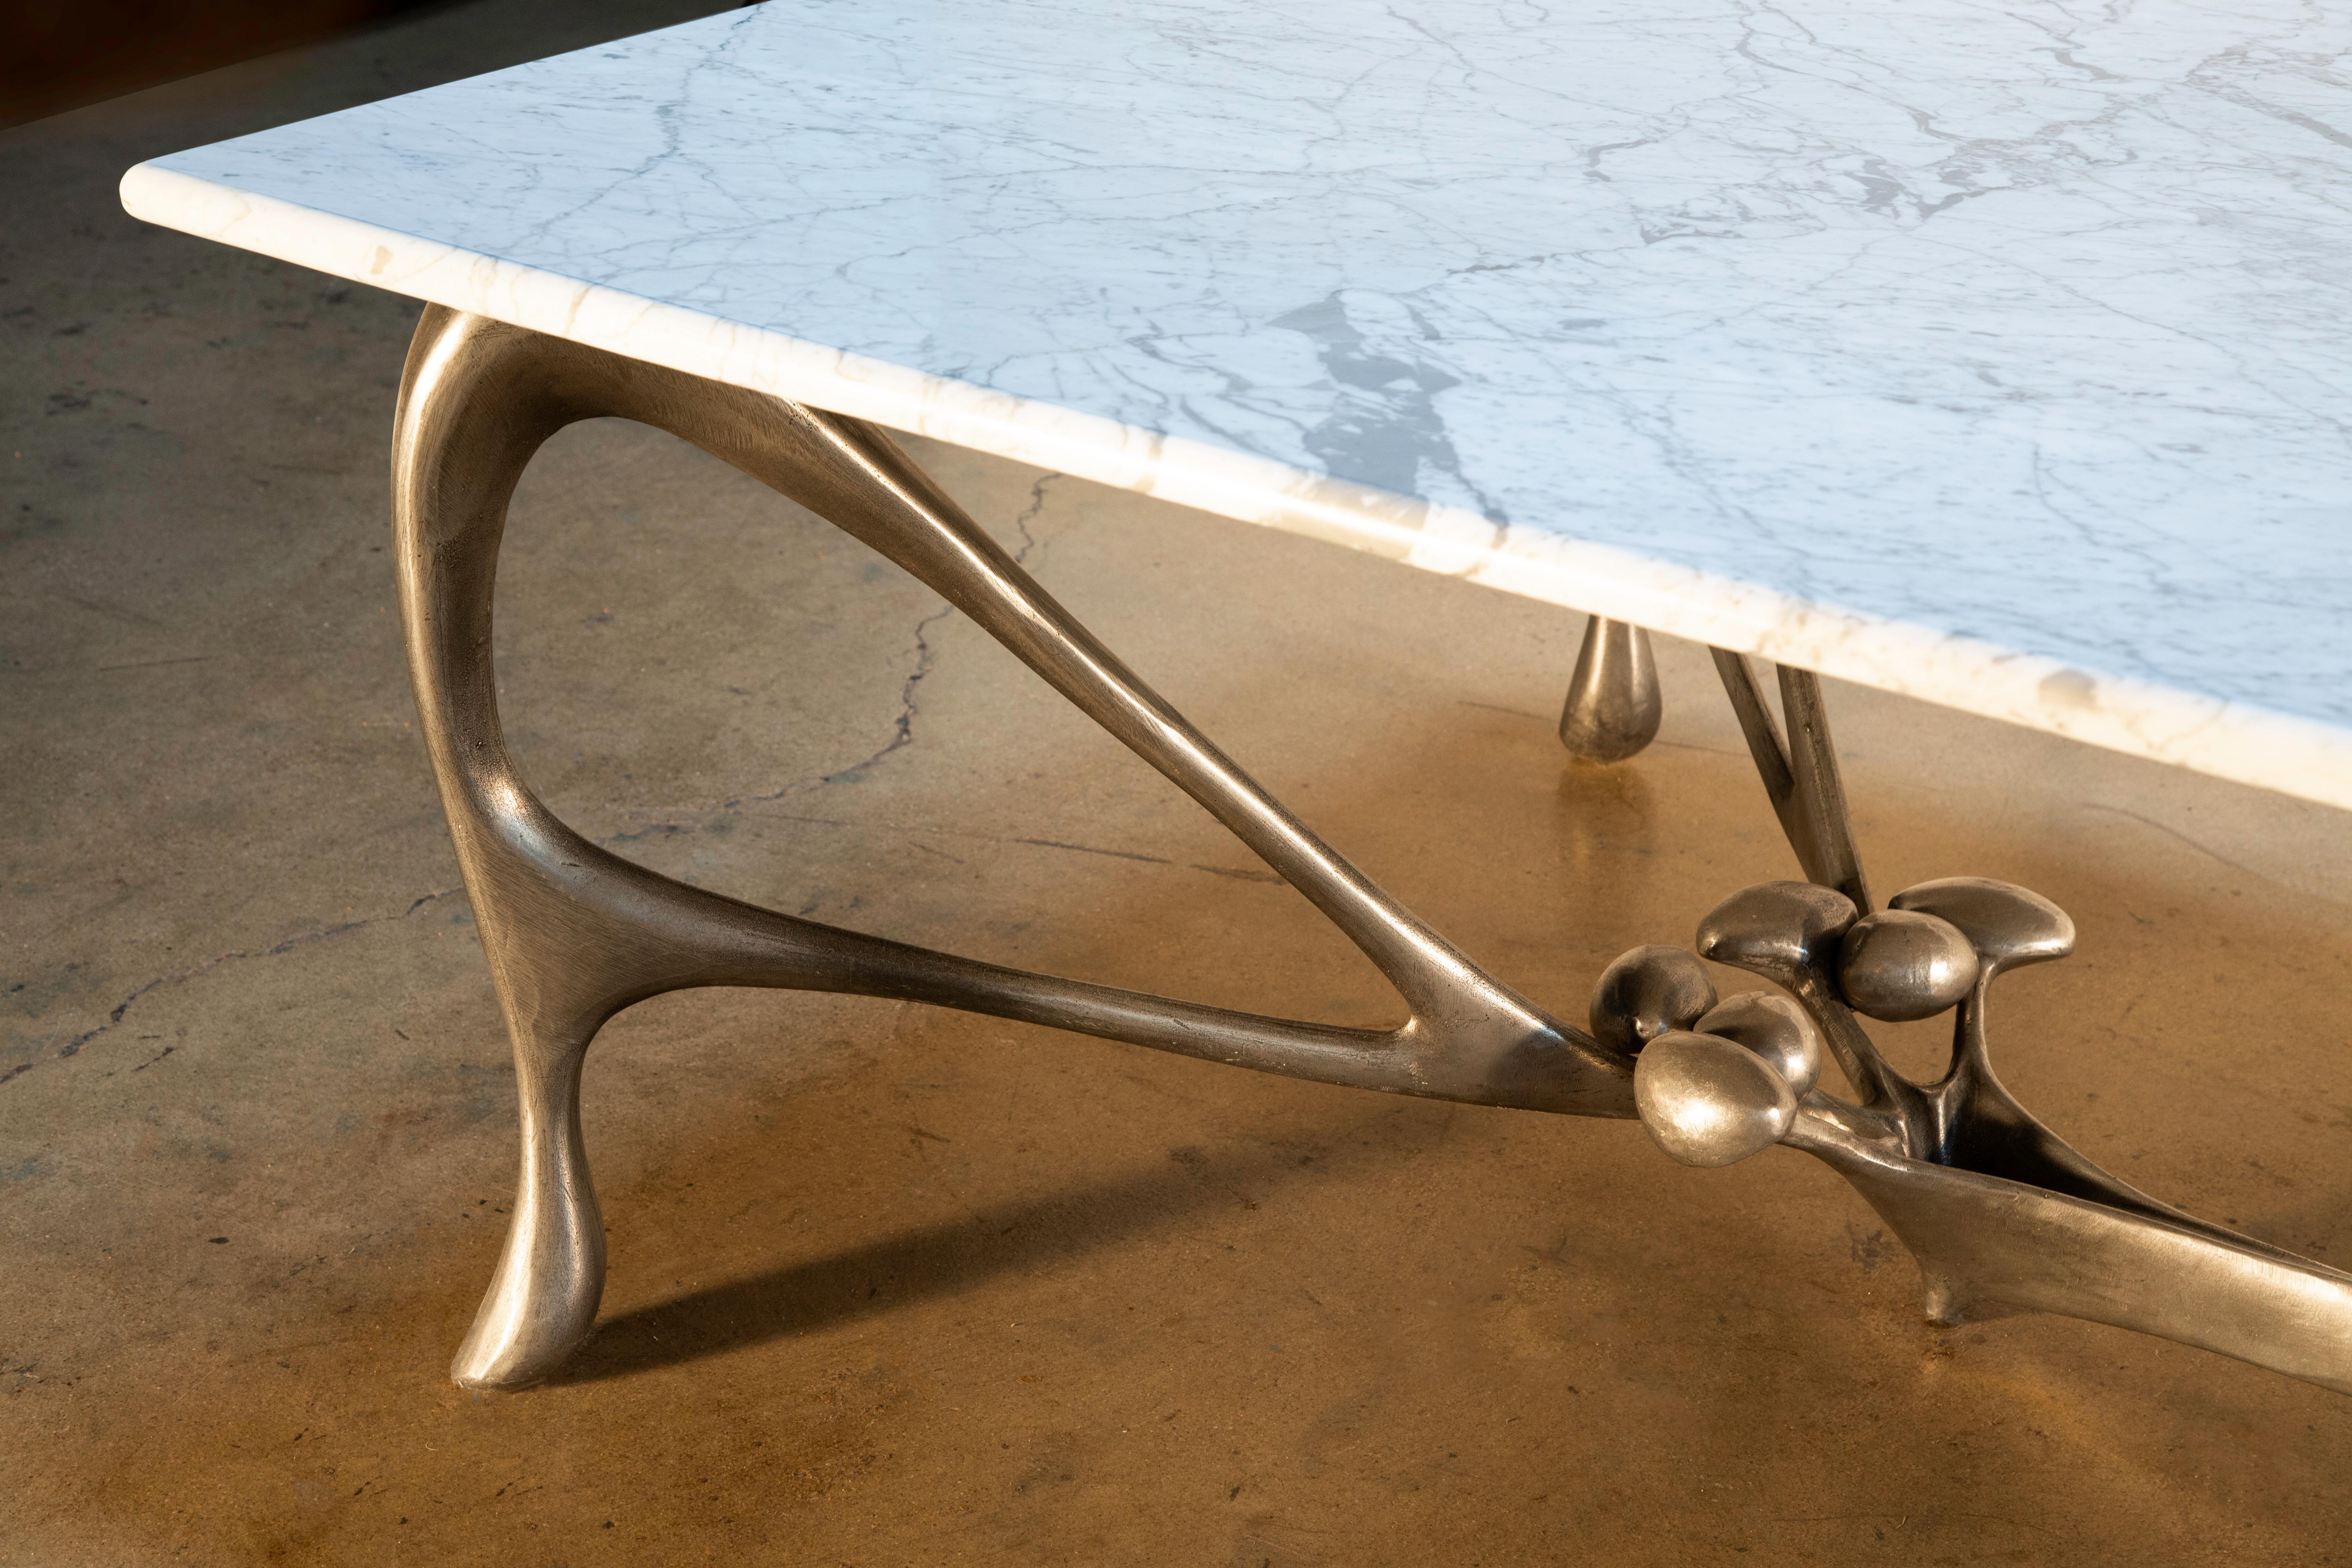 Leopold Blooming in paradise conference / dining table, by Jordan Mozer, Chicago, 2018. 
Cast, handworked and burnished aluminum-magnesium and highly figured Carrara marble with a matte polished finish. 
Provenance: Collection of the artist.